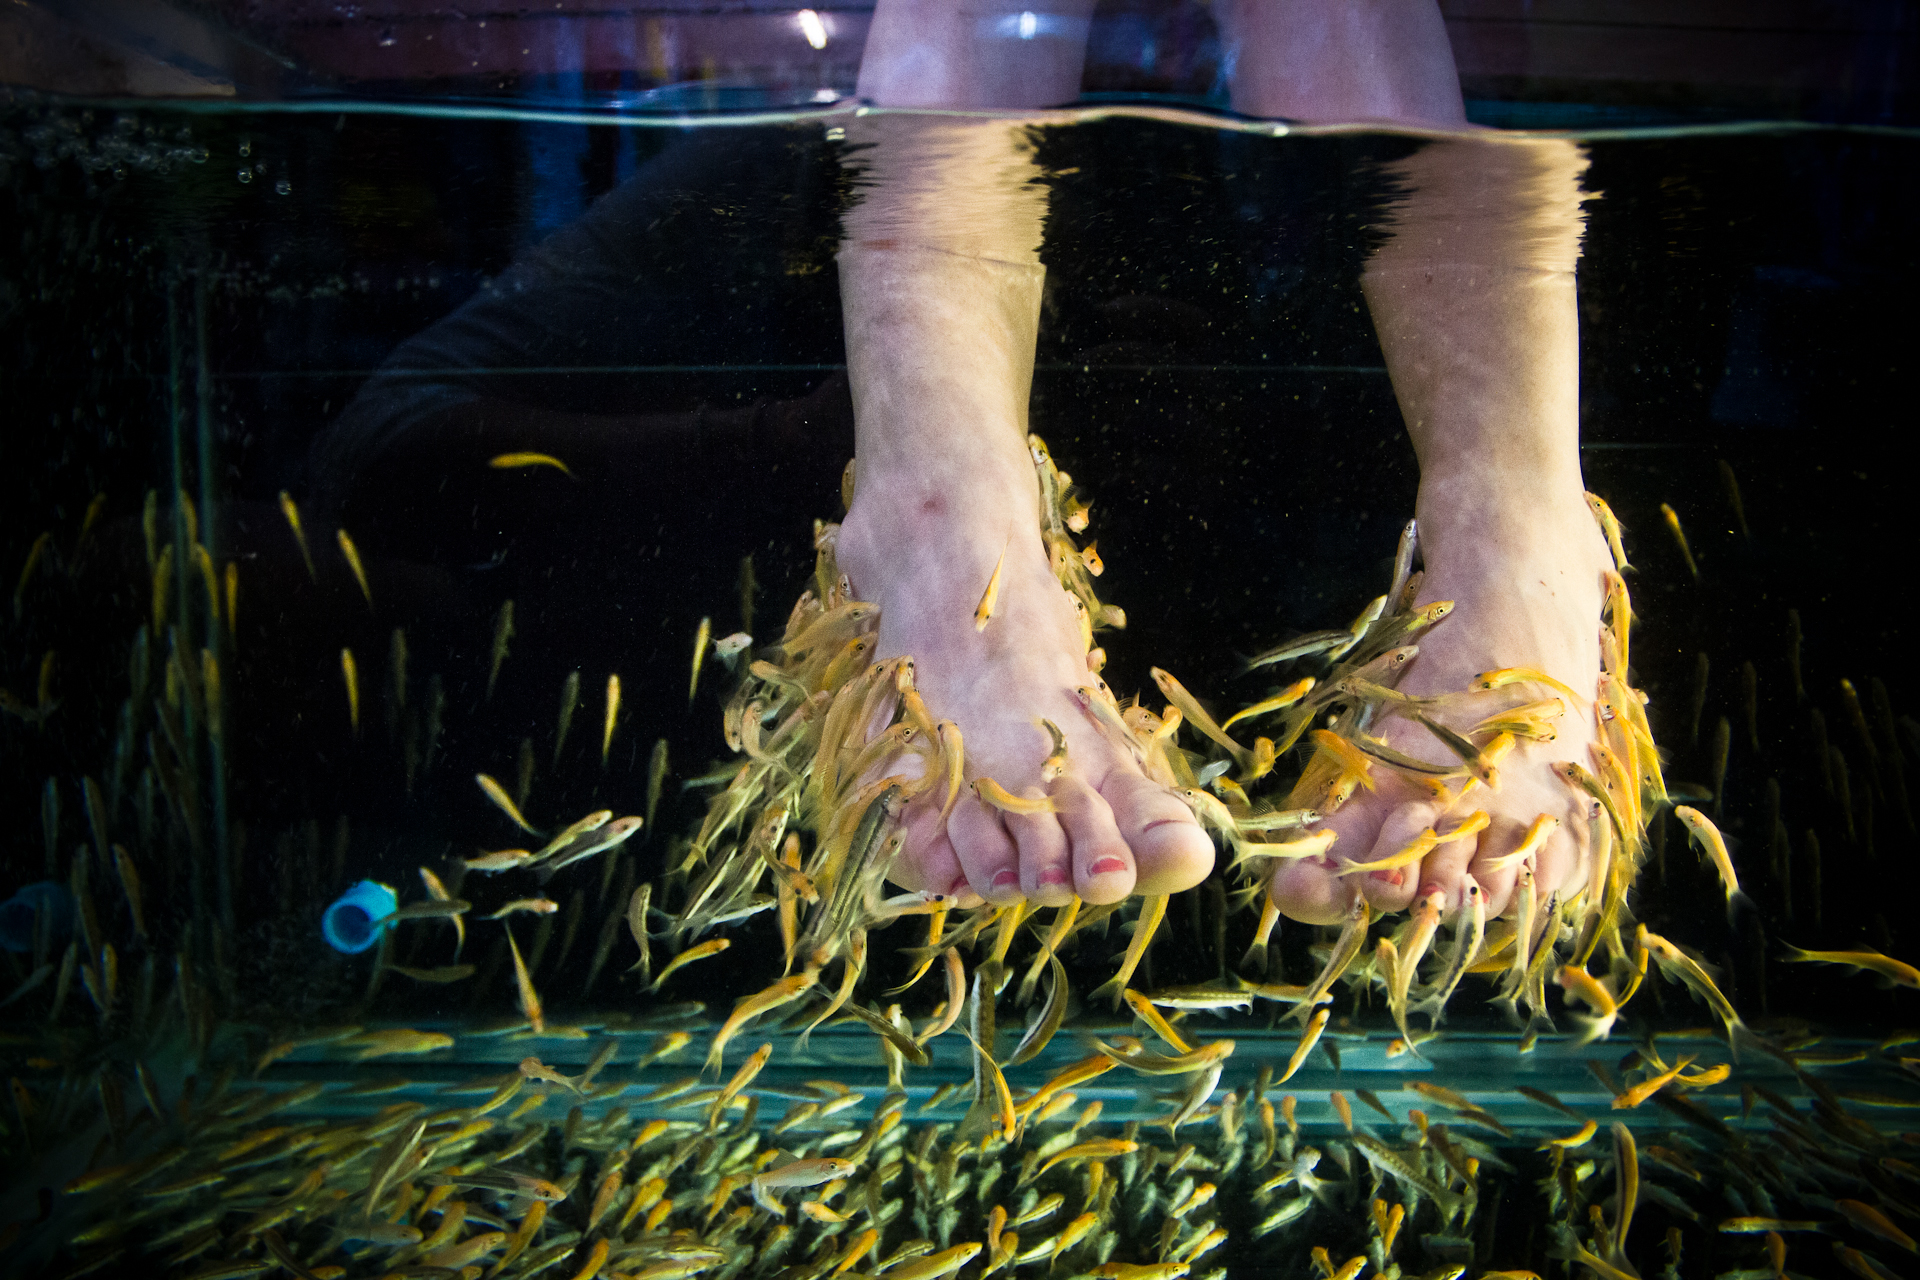 world in our hands_fish pedicure-DUP1.jpg